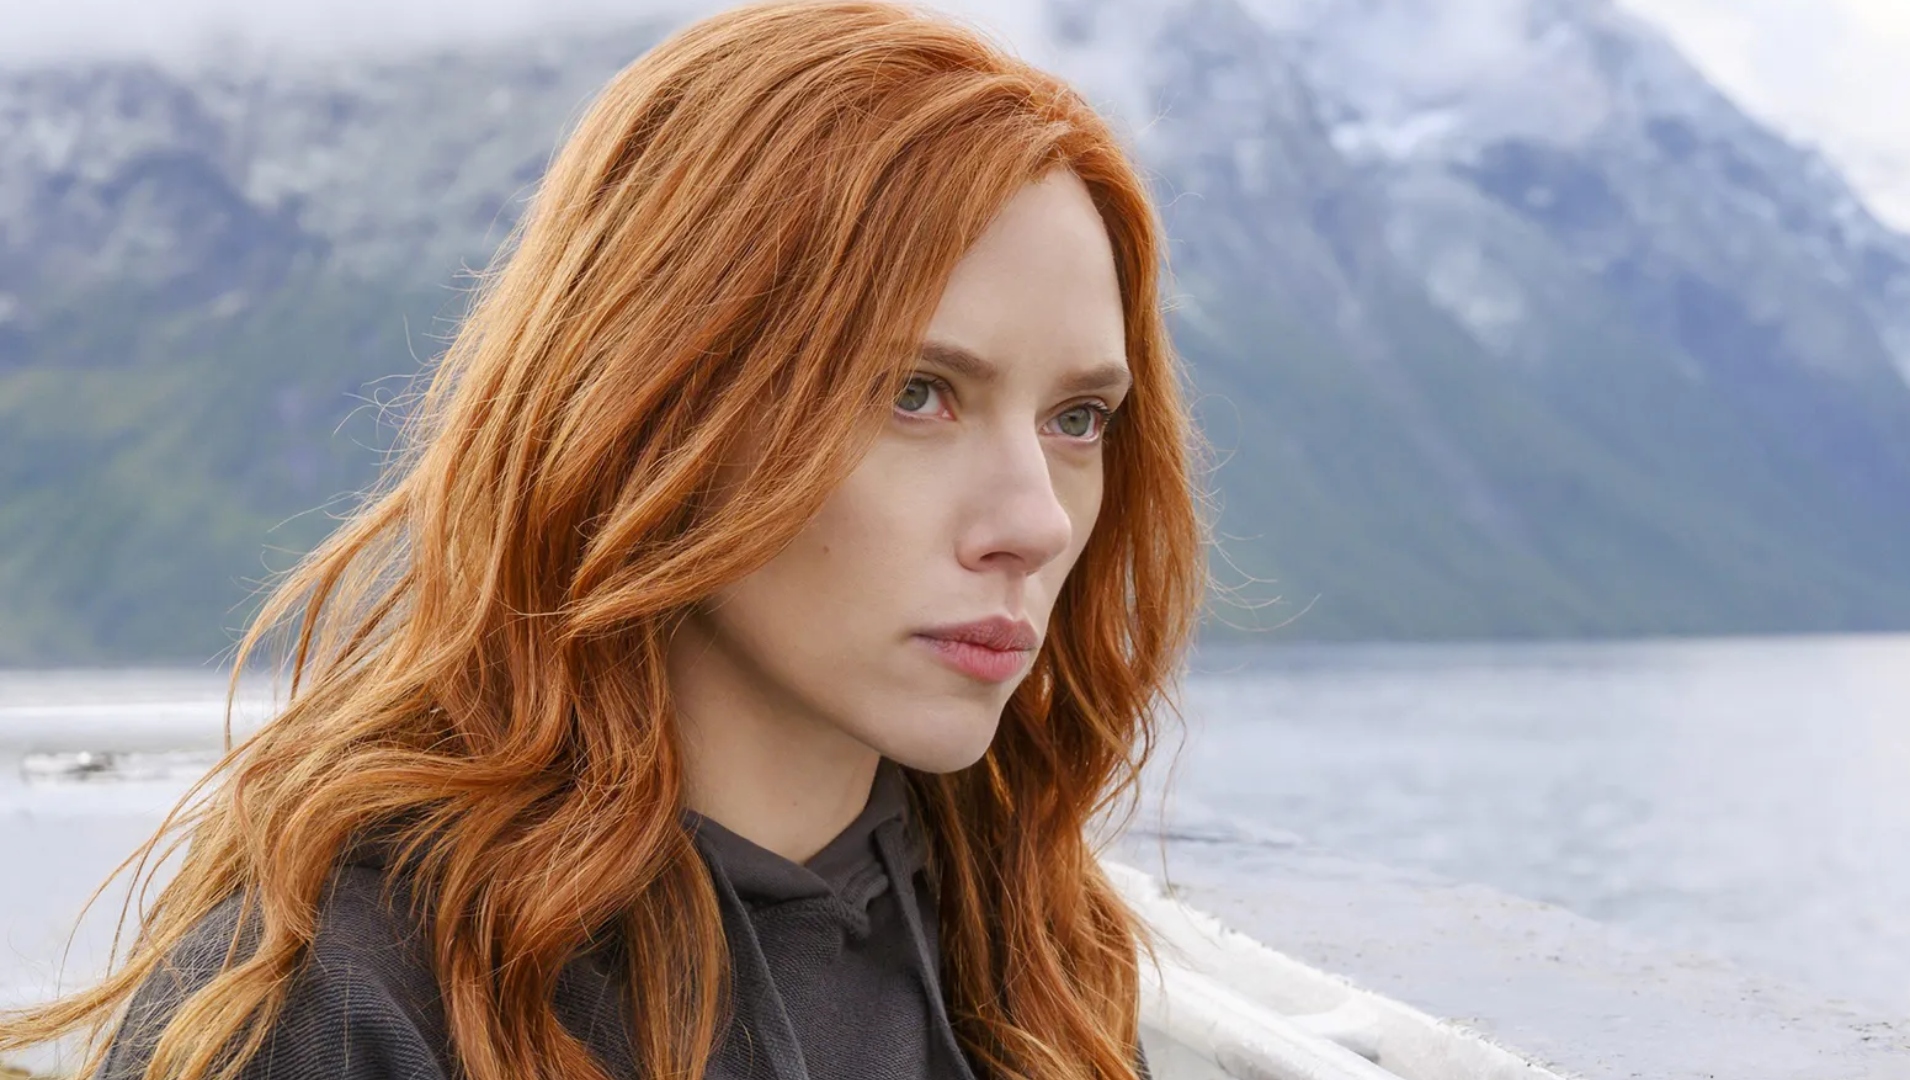 Scarlett Johansson speaks out about her departure from the Marvel Universe